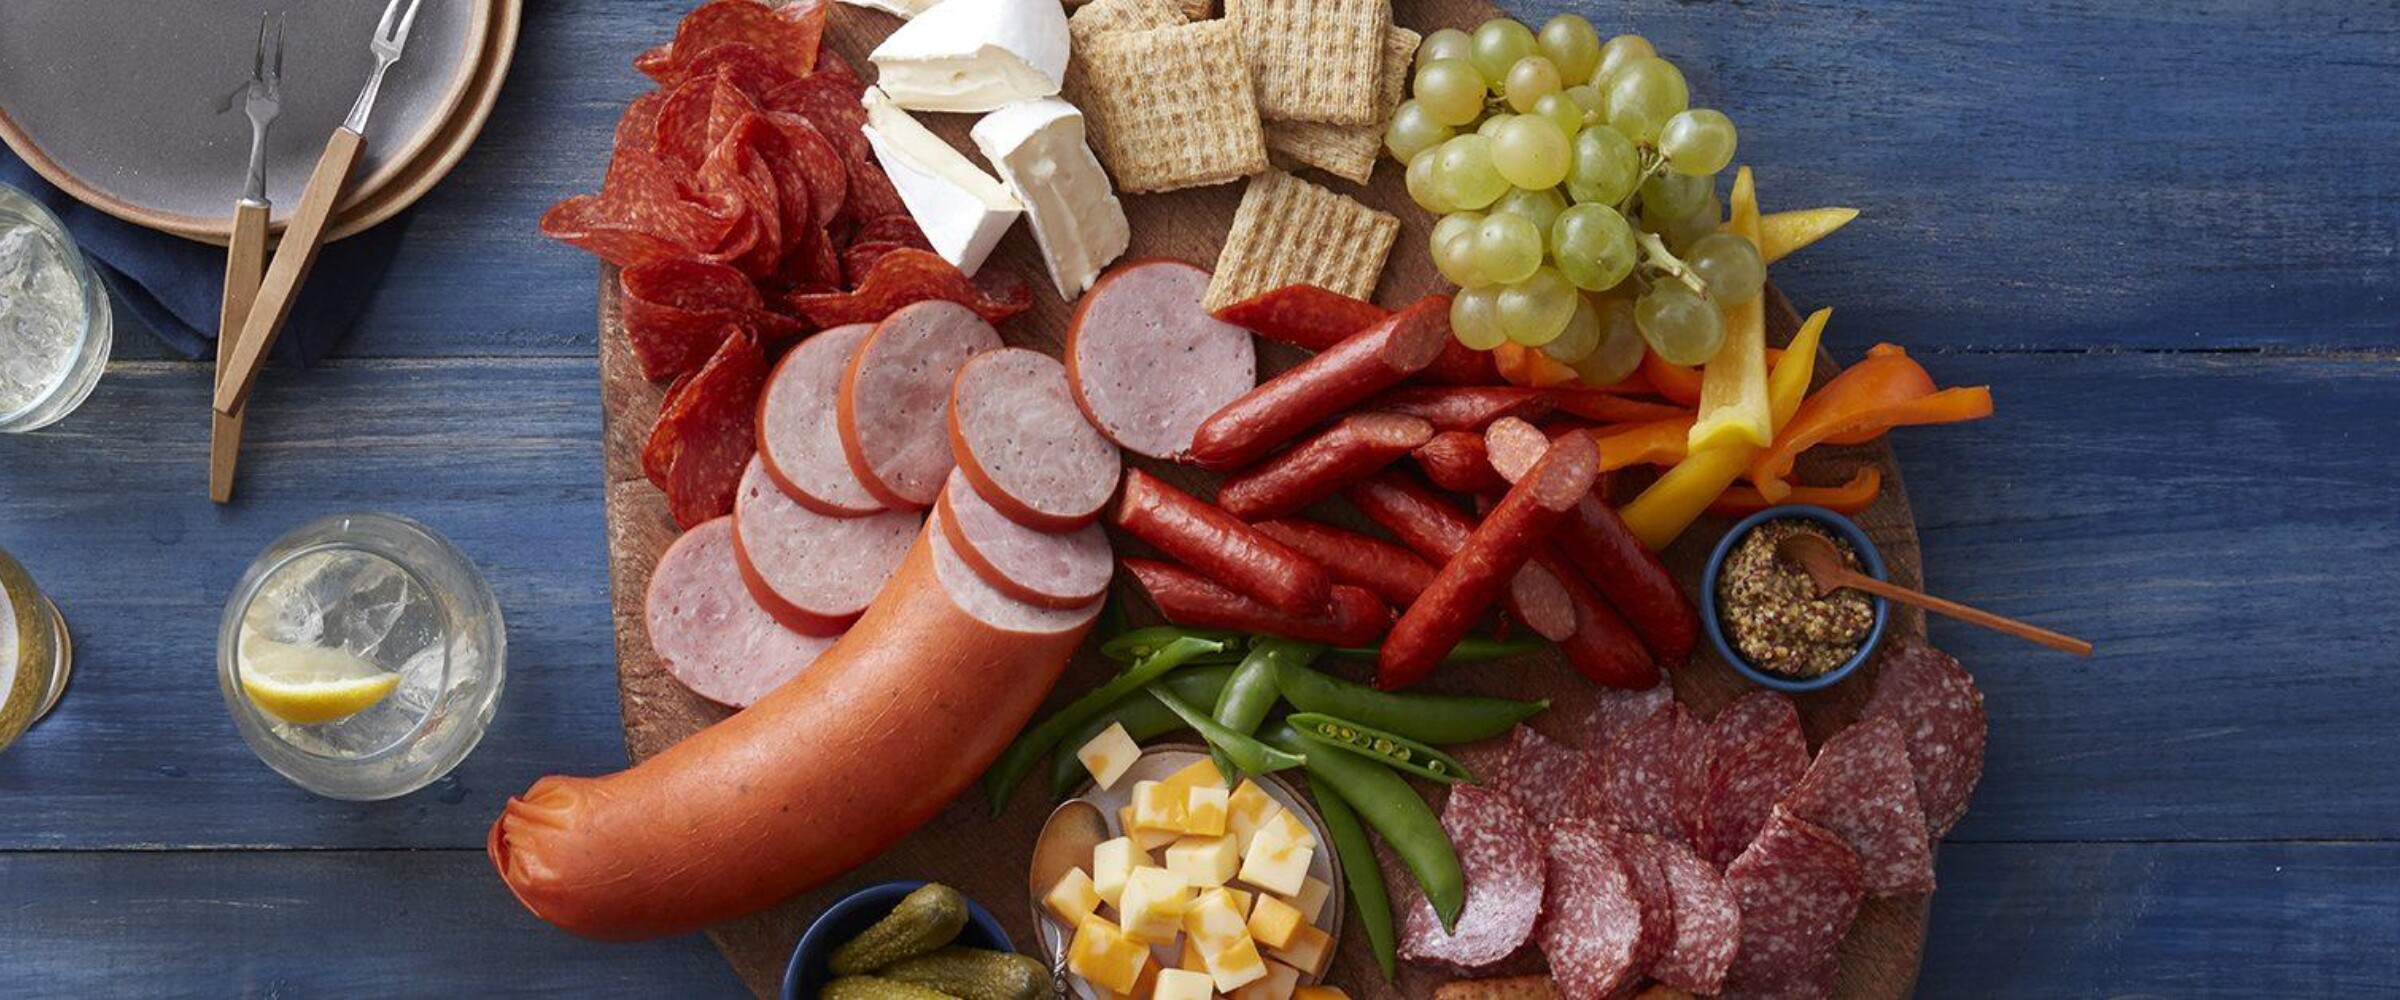 Large charcuterie board with meat, cheese, fruit, vegetables and crackers